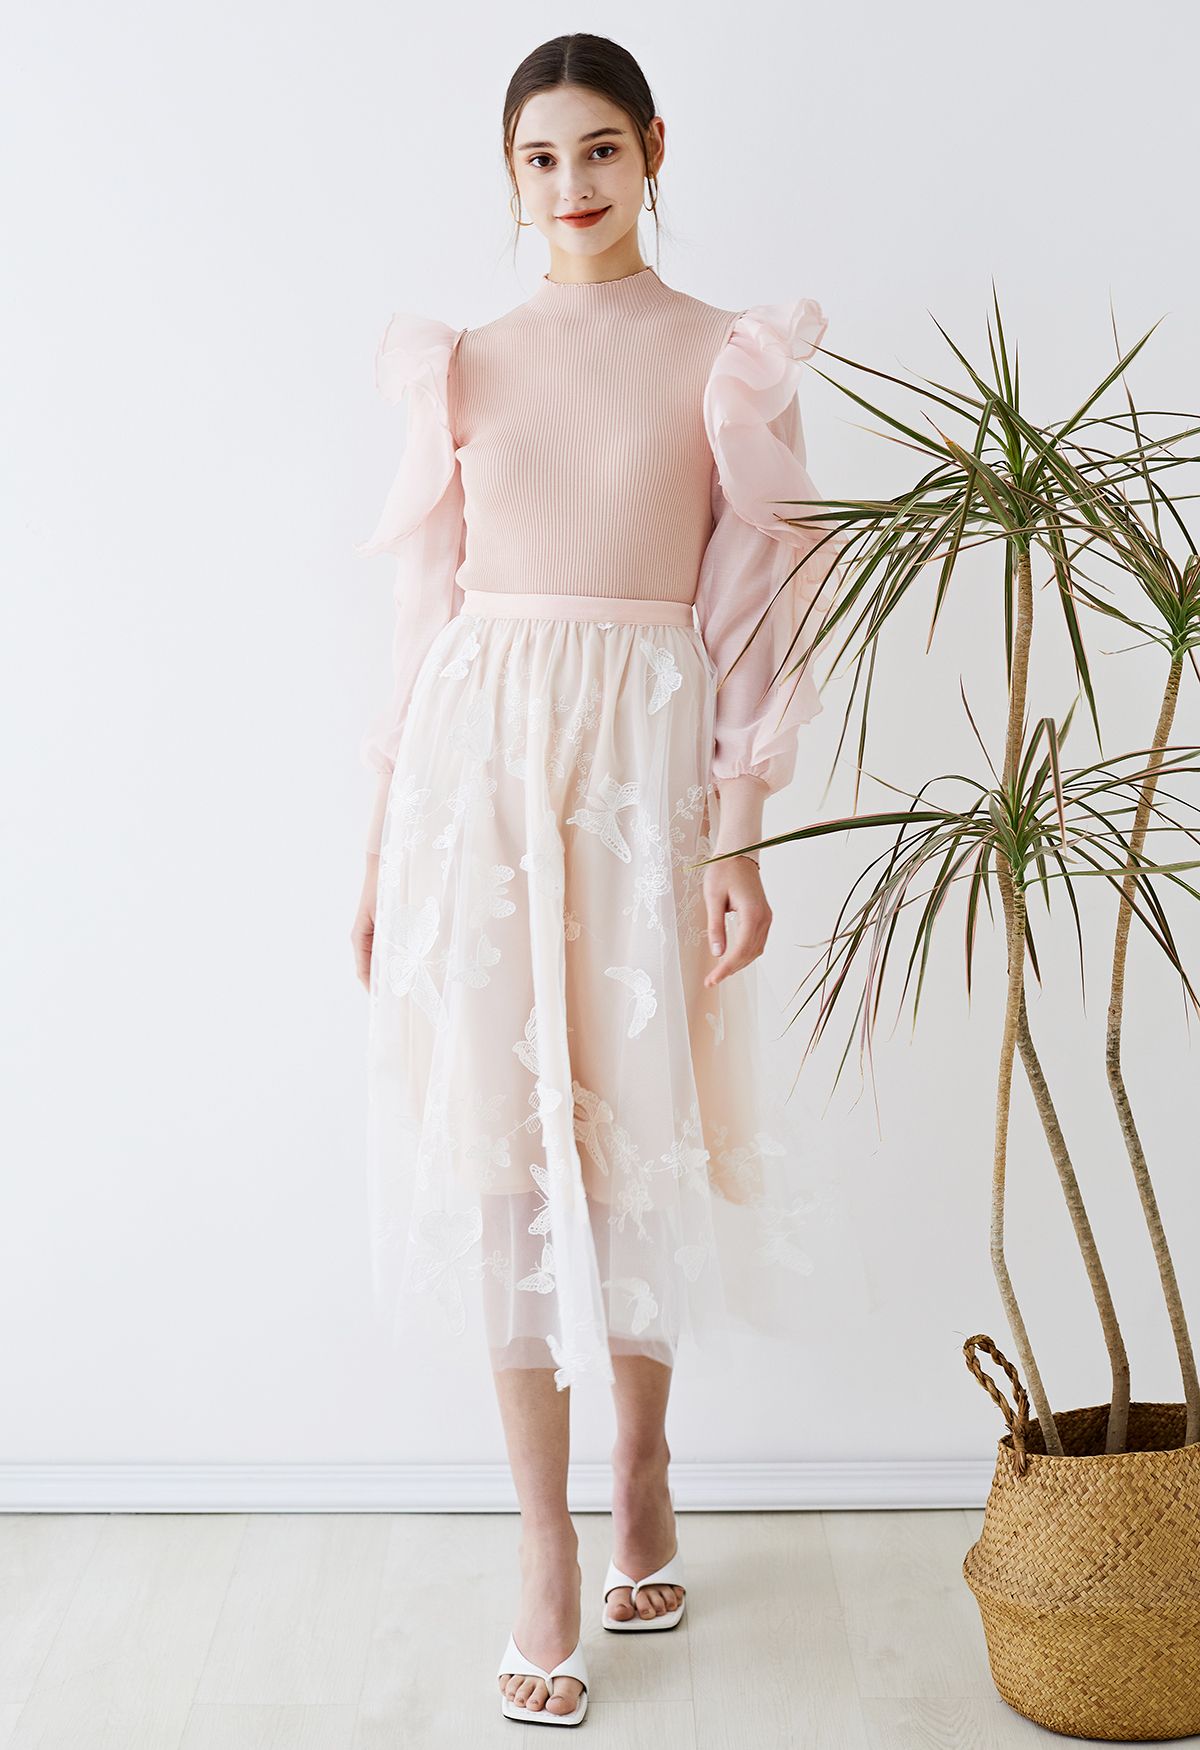 Tiered Ruffle Sleeves Spliced Knit Top in Pink